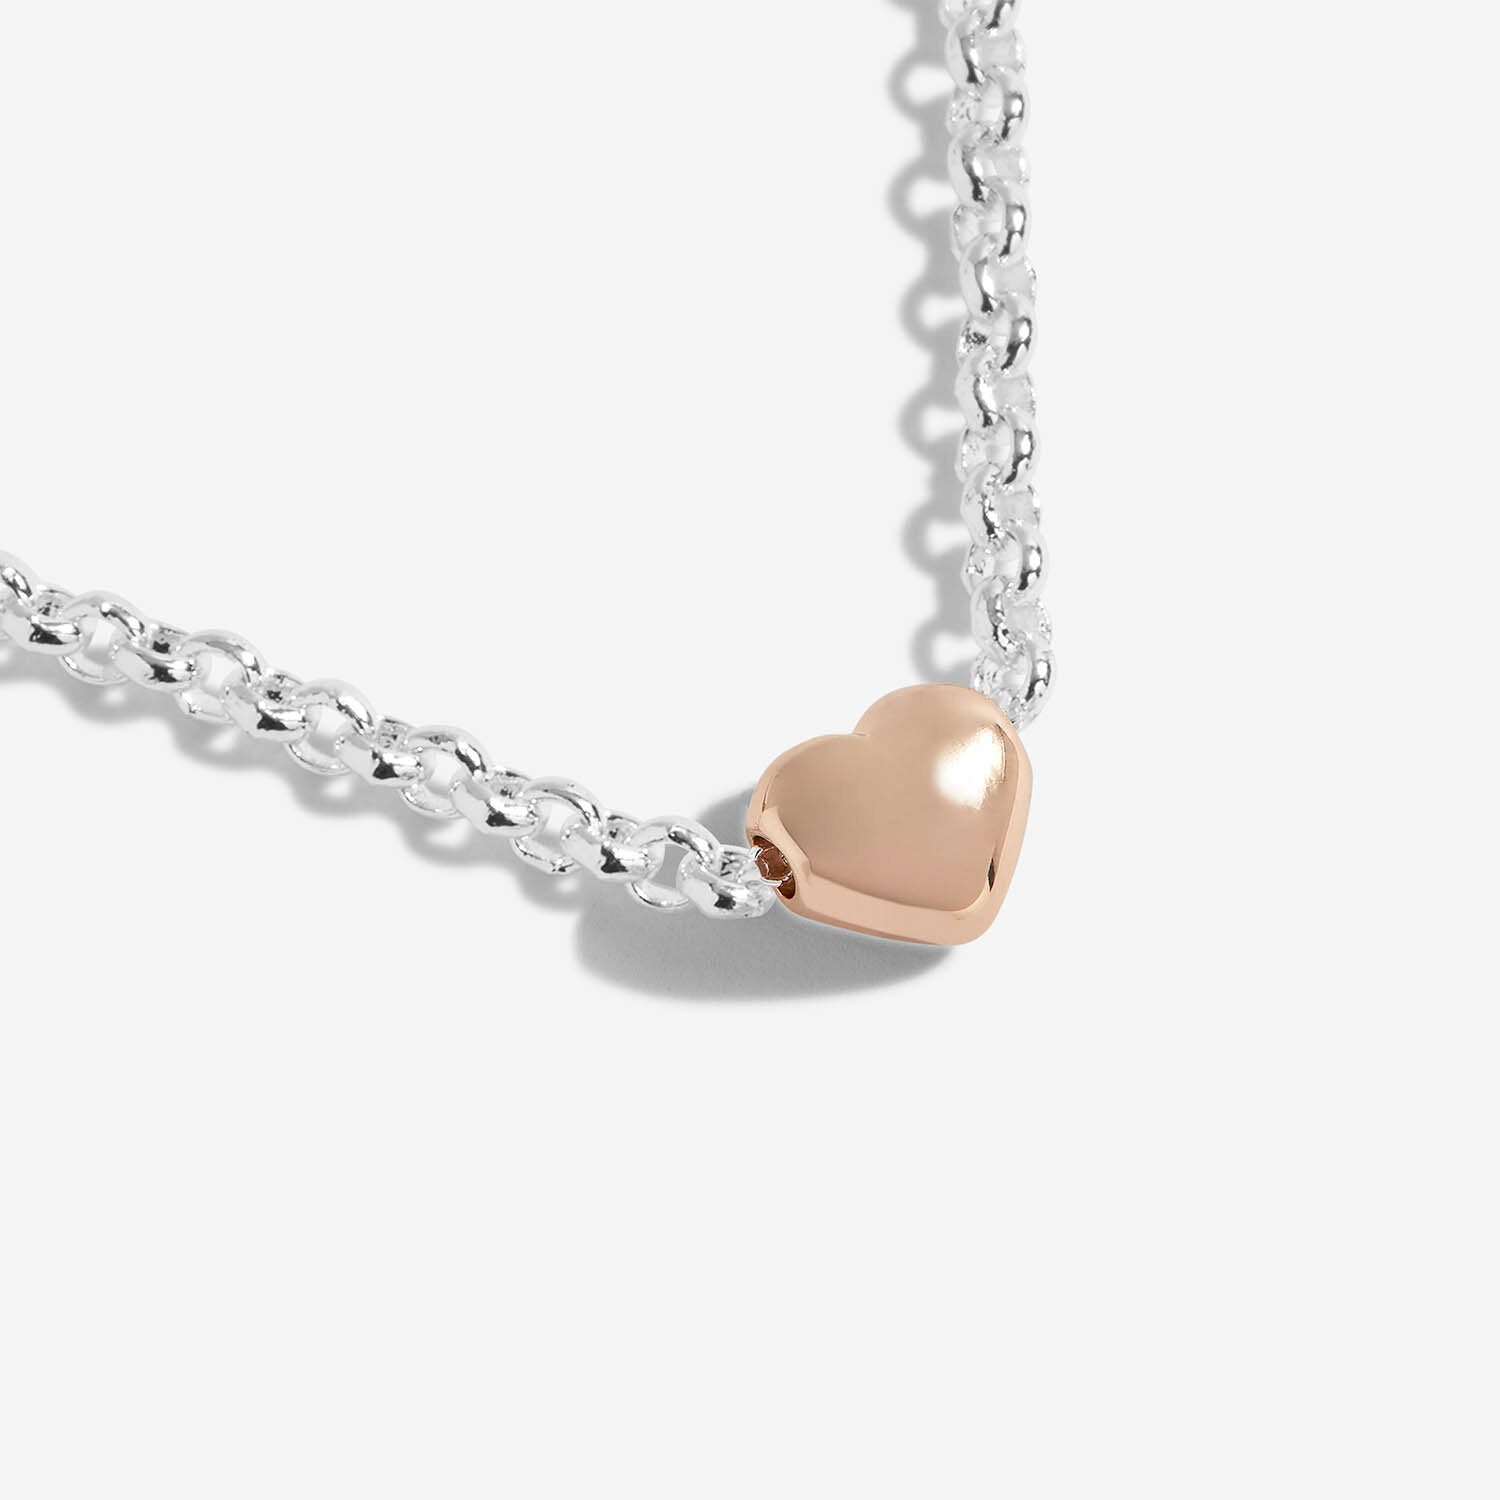 Joma Jewellery A Little 'Proud Of You' Necklace